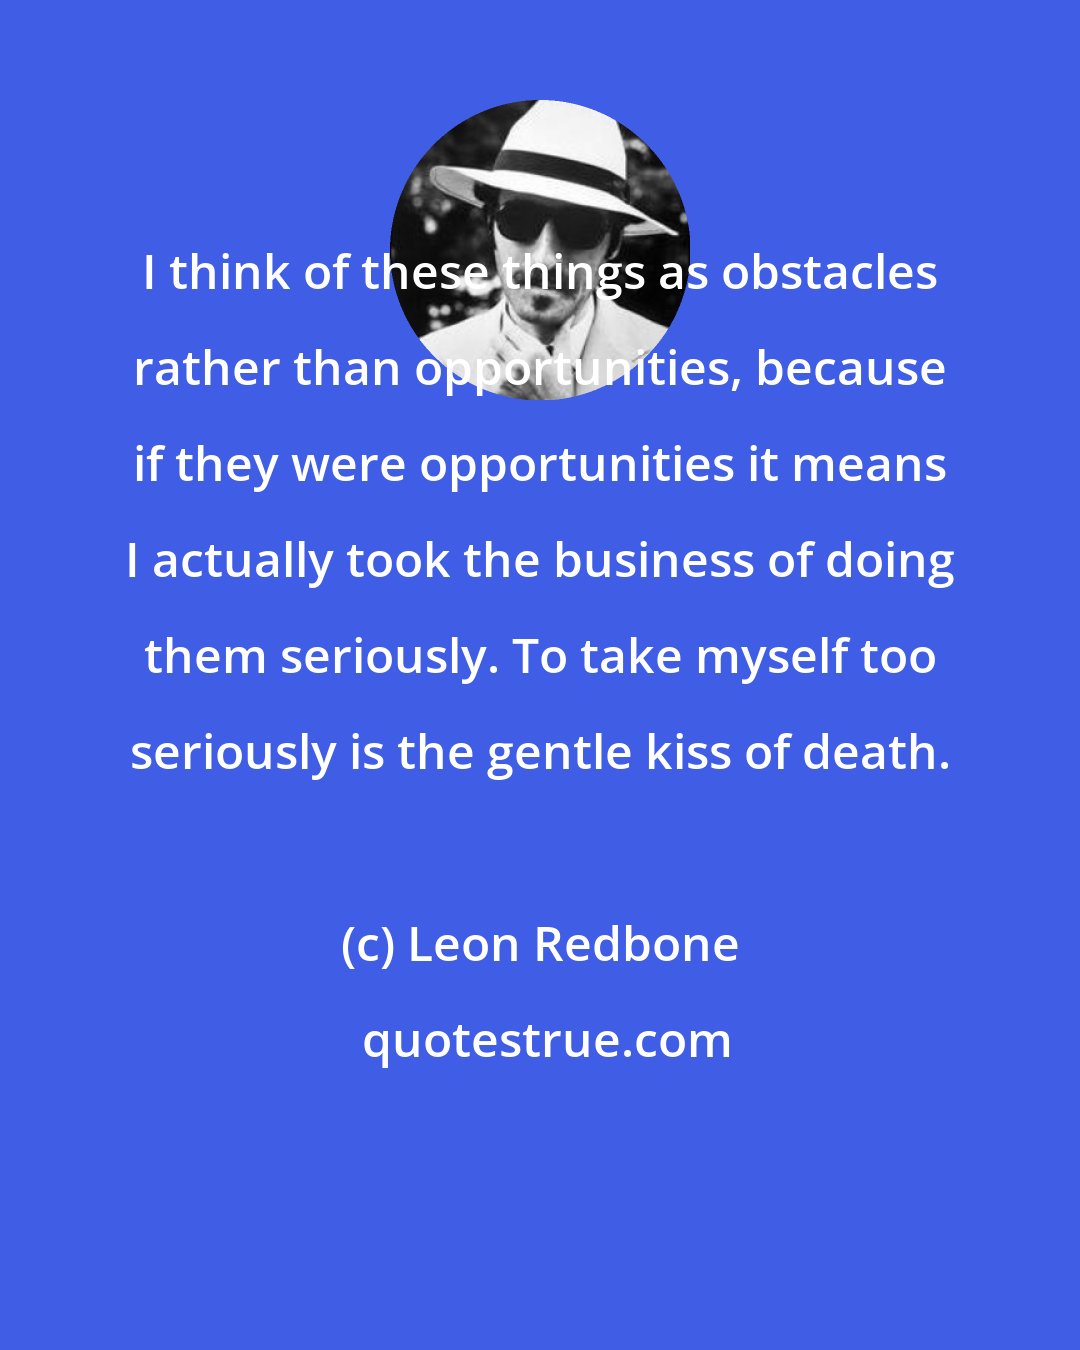 Leon Redbone: I think of these things as obstacles rather than opportunities, because if they were opportunities it means I actually took the business of doing them seriously. To take myself too seriously is the gentle kiss of death.